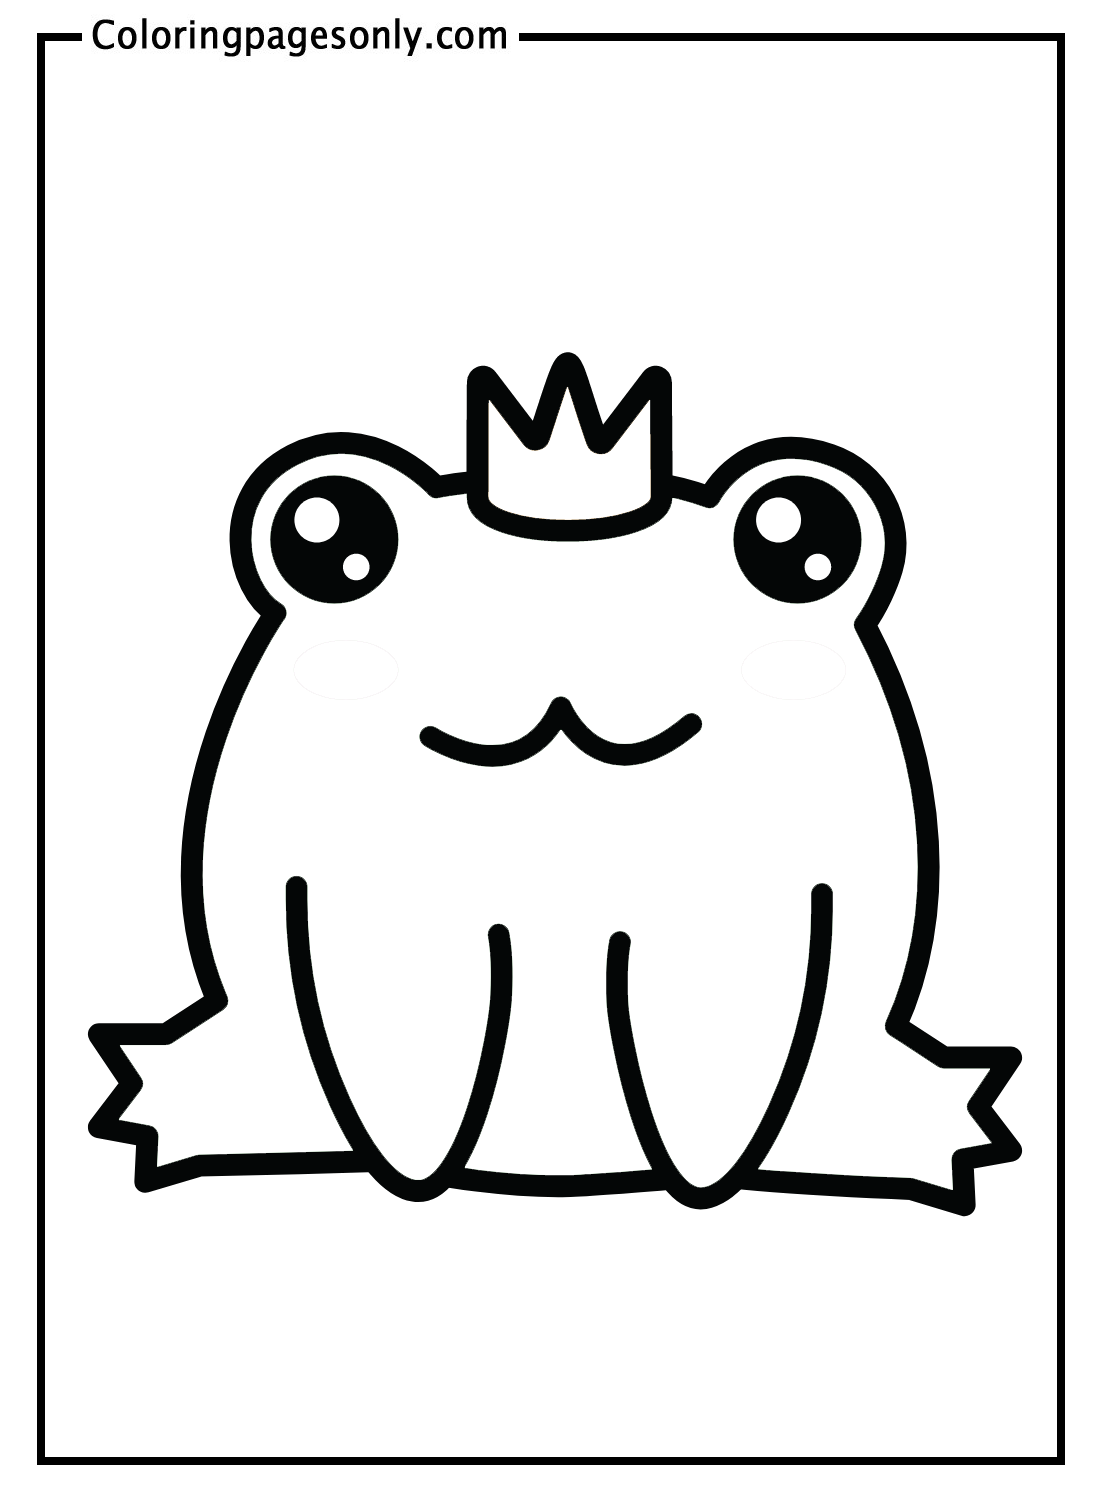 Frog Princess Sticker Coloring Pages